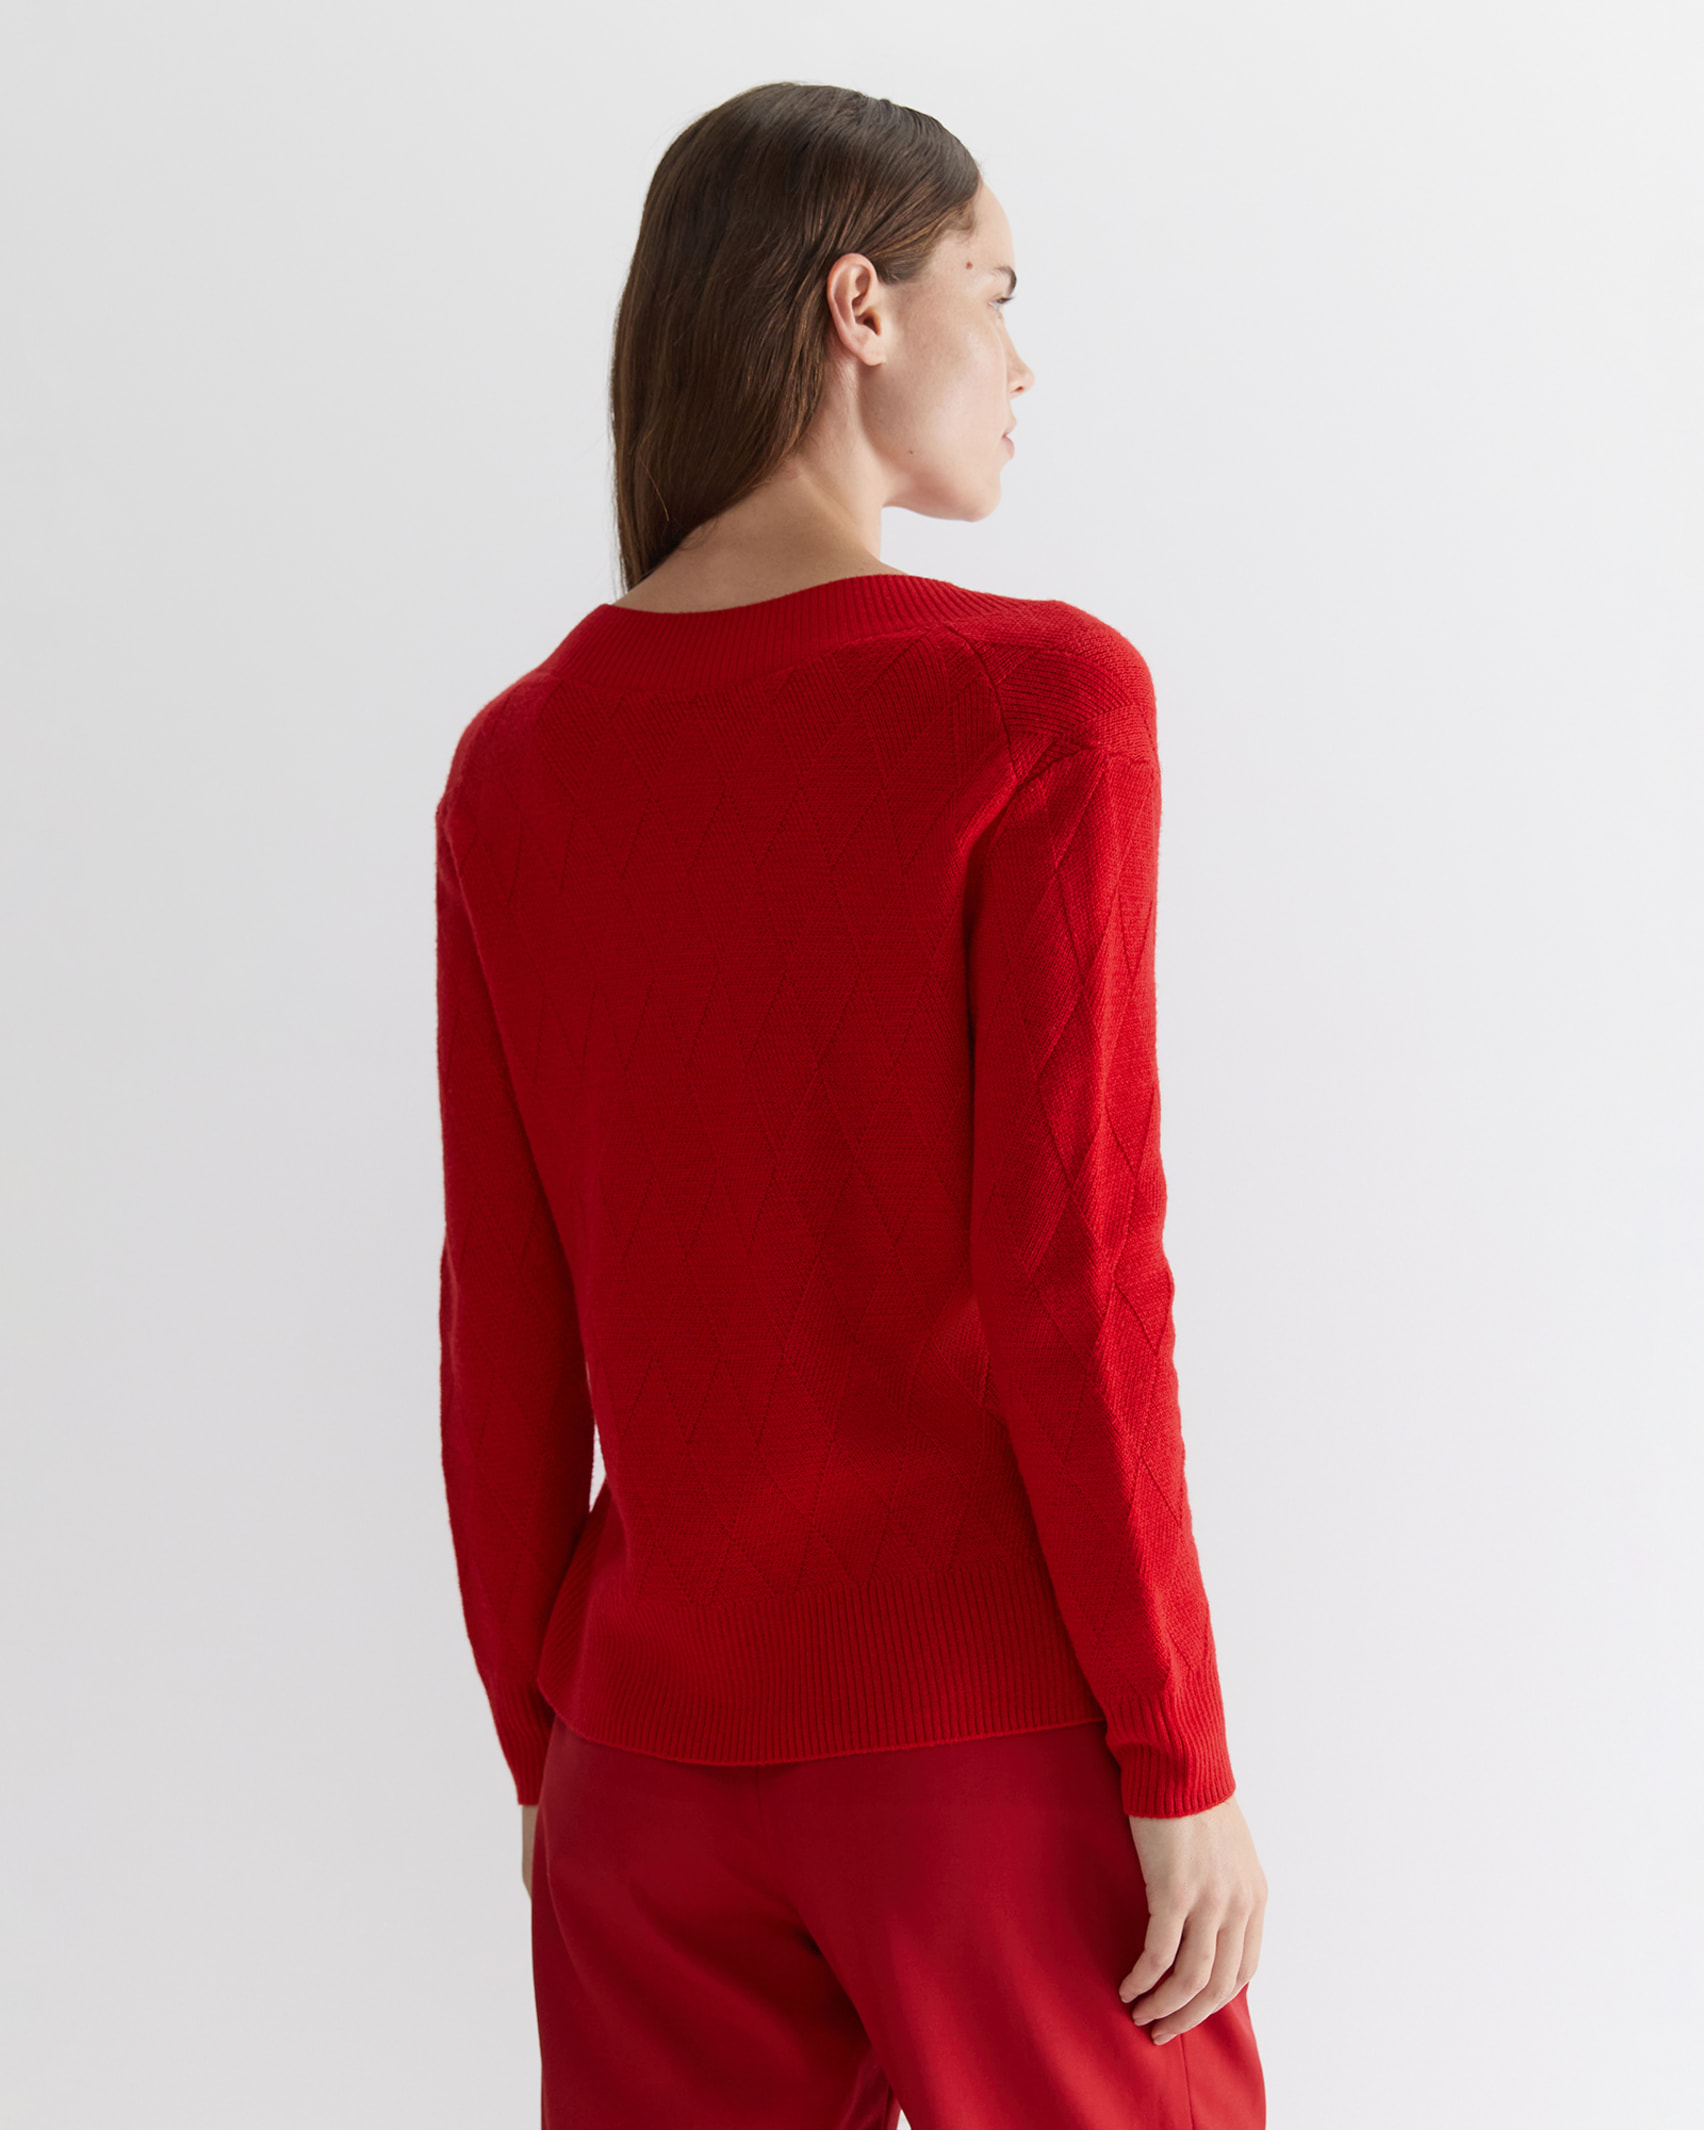 Cass Diamond Cable Sweater in RED